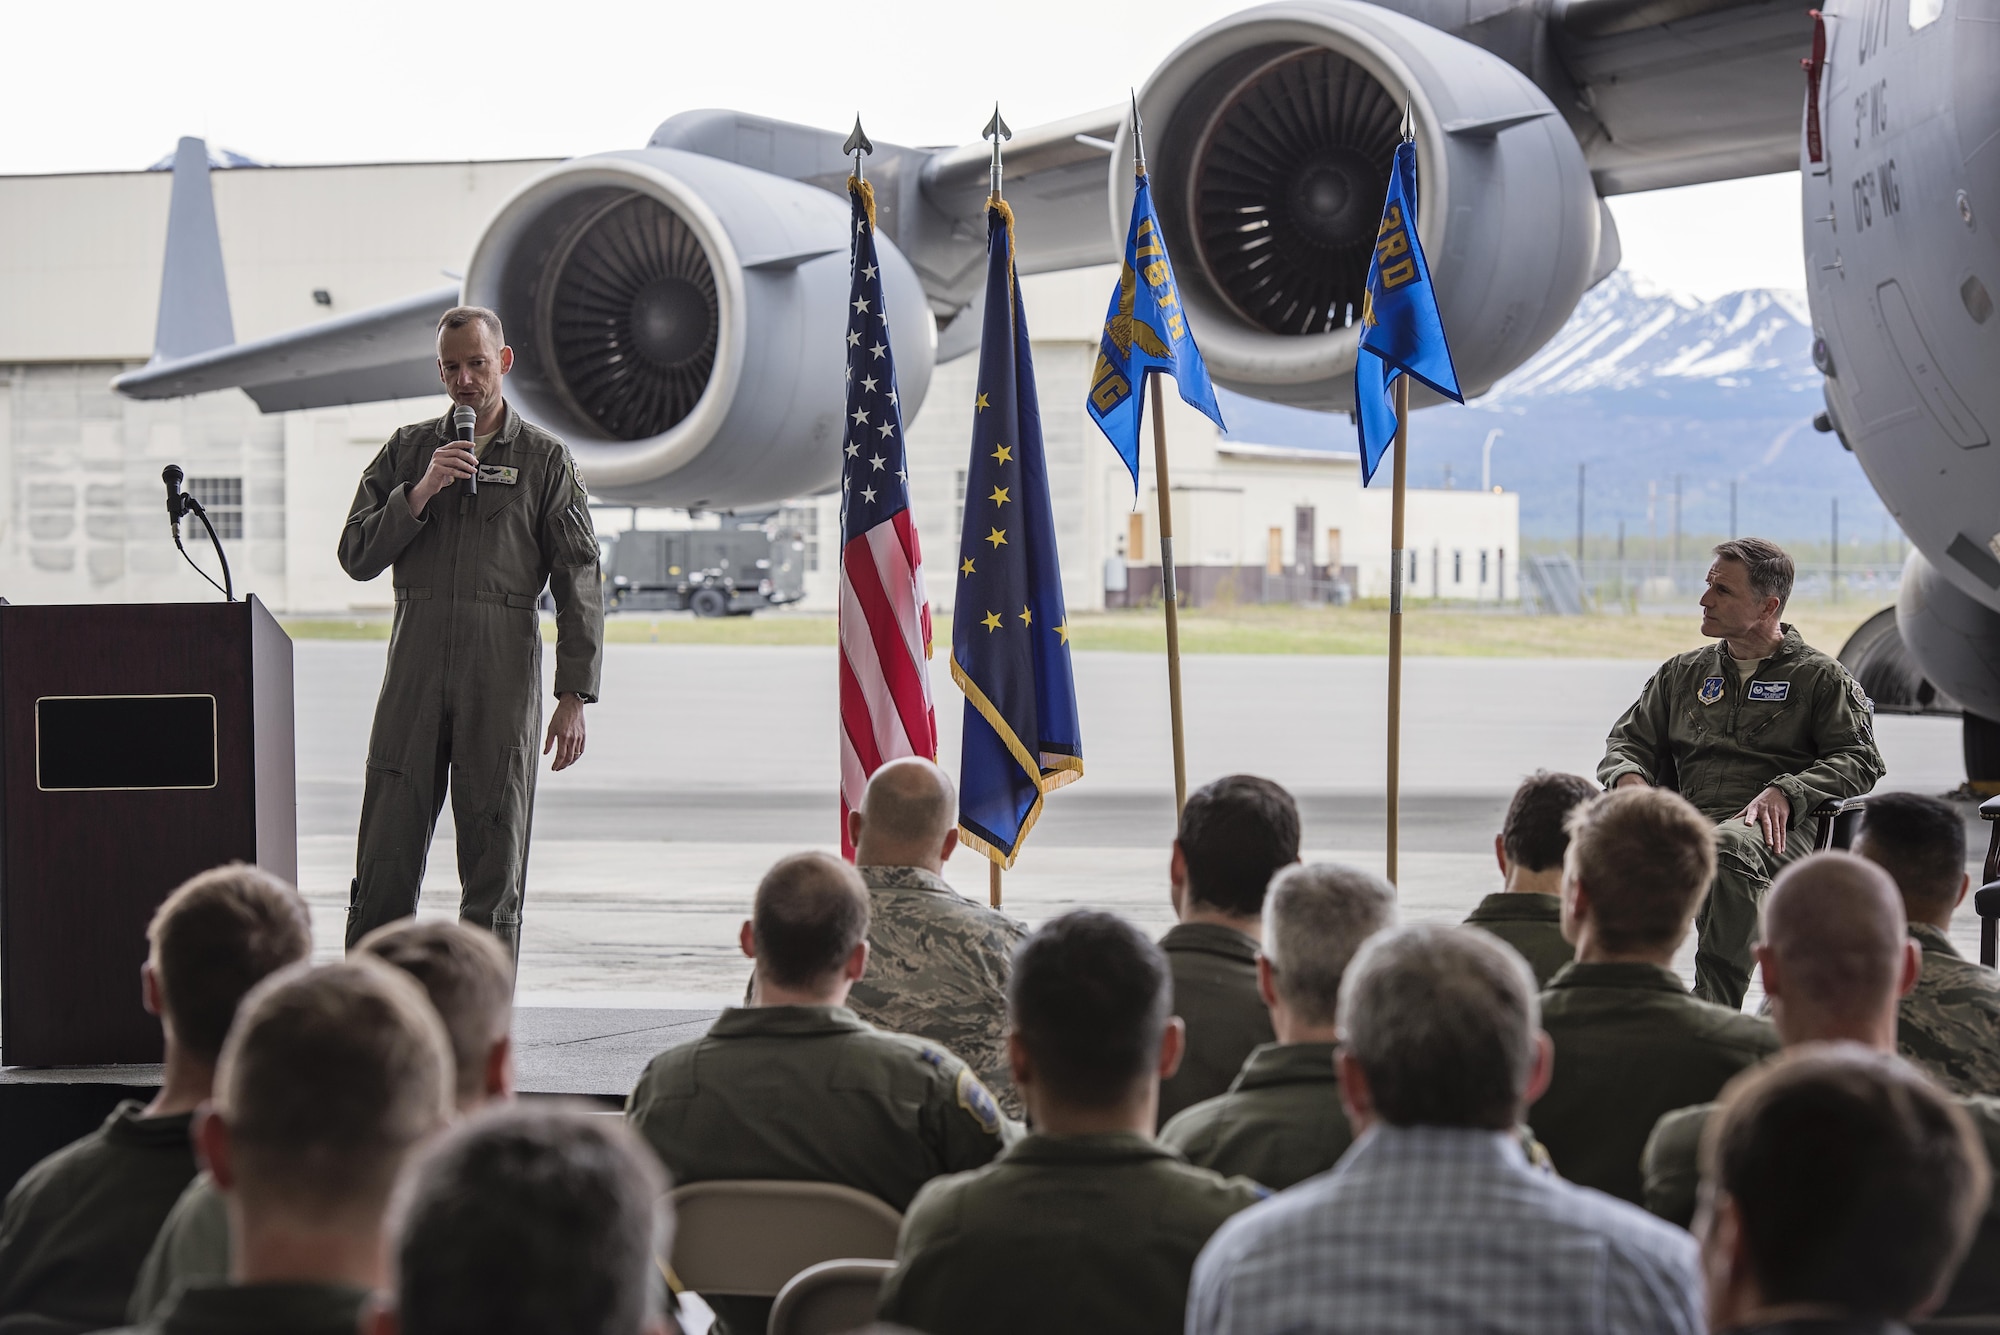 Col. Steven deMilliano, commander of the 176th Wing, Alaska Air National Guard, and Col. Christopher Niemi, commander of the 3rd Wing, U.S. Air Force, commemorated the change of assignment of eight C-17 Globe Master III aircraft based here during a ceremony on Joint Base Elmendorf-Richardson, Alaska, May 17. The two commanders took turns speaking to Airmen from both Wings about the transfer of the aircraft from active duty to the Guard and how the units will continue to support the C-17 mission together in the arctic and Pacific regions. (U.S. Air National Guard photo by Staff Sgt. Edward Eagerton/released)